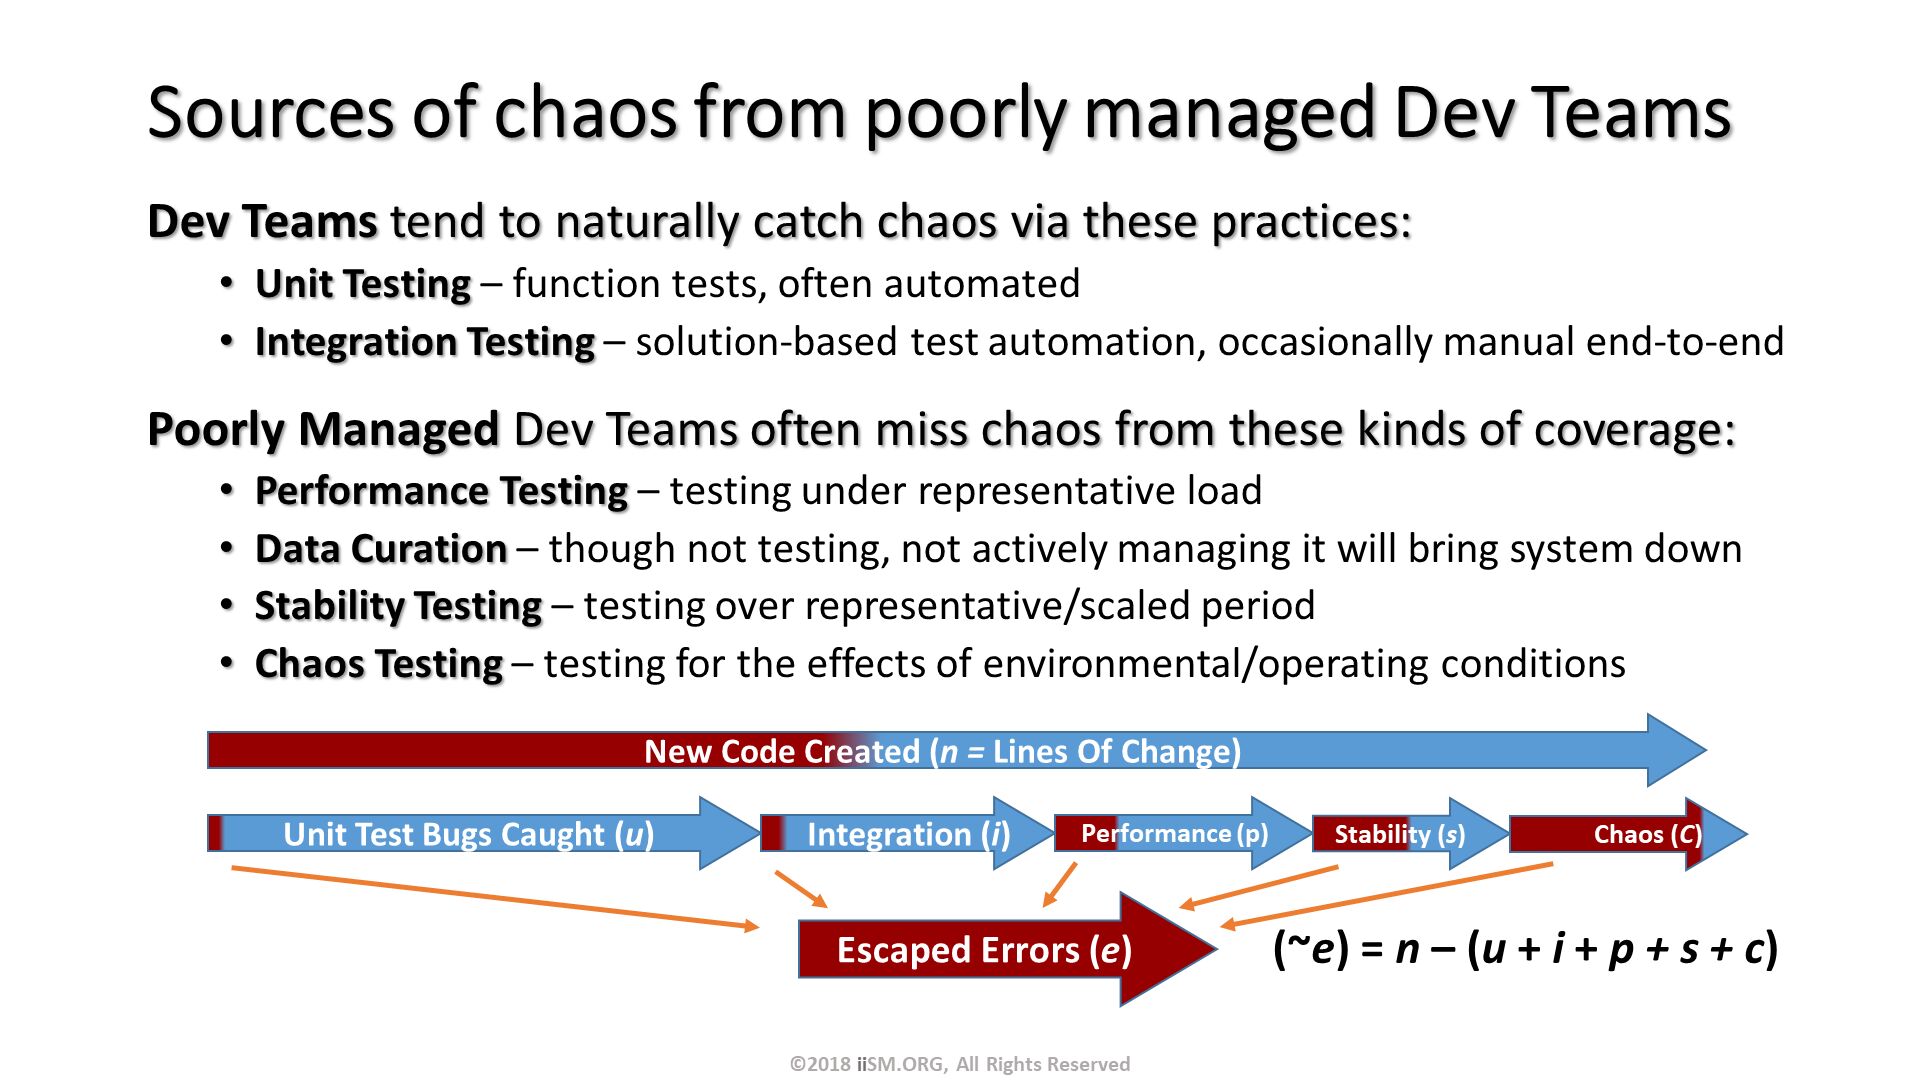 Sources of chaos from poorly managed Dev Teams. Dev Teams tend to naturally catch chaos via these practices:
Unit Testing – function tests, often automated
Integration Testing – solution-based test automation, occasionally manual end-to-end
Poorly Managed Dev Teams often miss chaos from these kinds of coverage:
Performance Testing – testing under representative load
Data Curation – though not testing, not actively managing it will bring system down
Stability Testing – testing over representative/scaled period
Chaos Testing – testing for the effects of environmental/operating conditions
. ©2018 iiSM.ORG, All Rights Reserved. (~e) = n – (u + i + p + s + c) . 